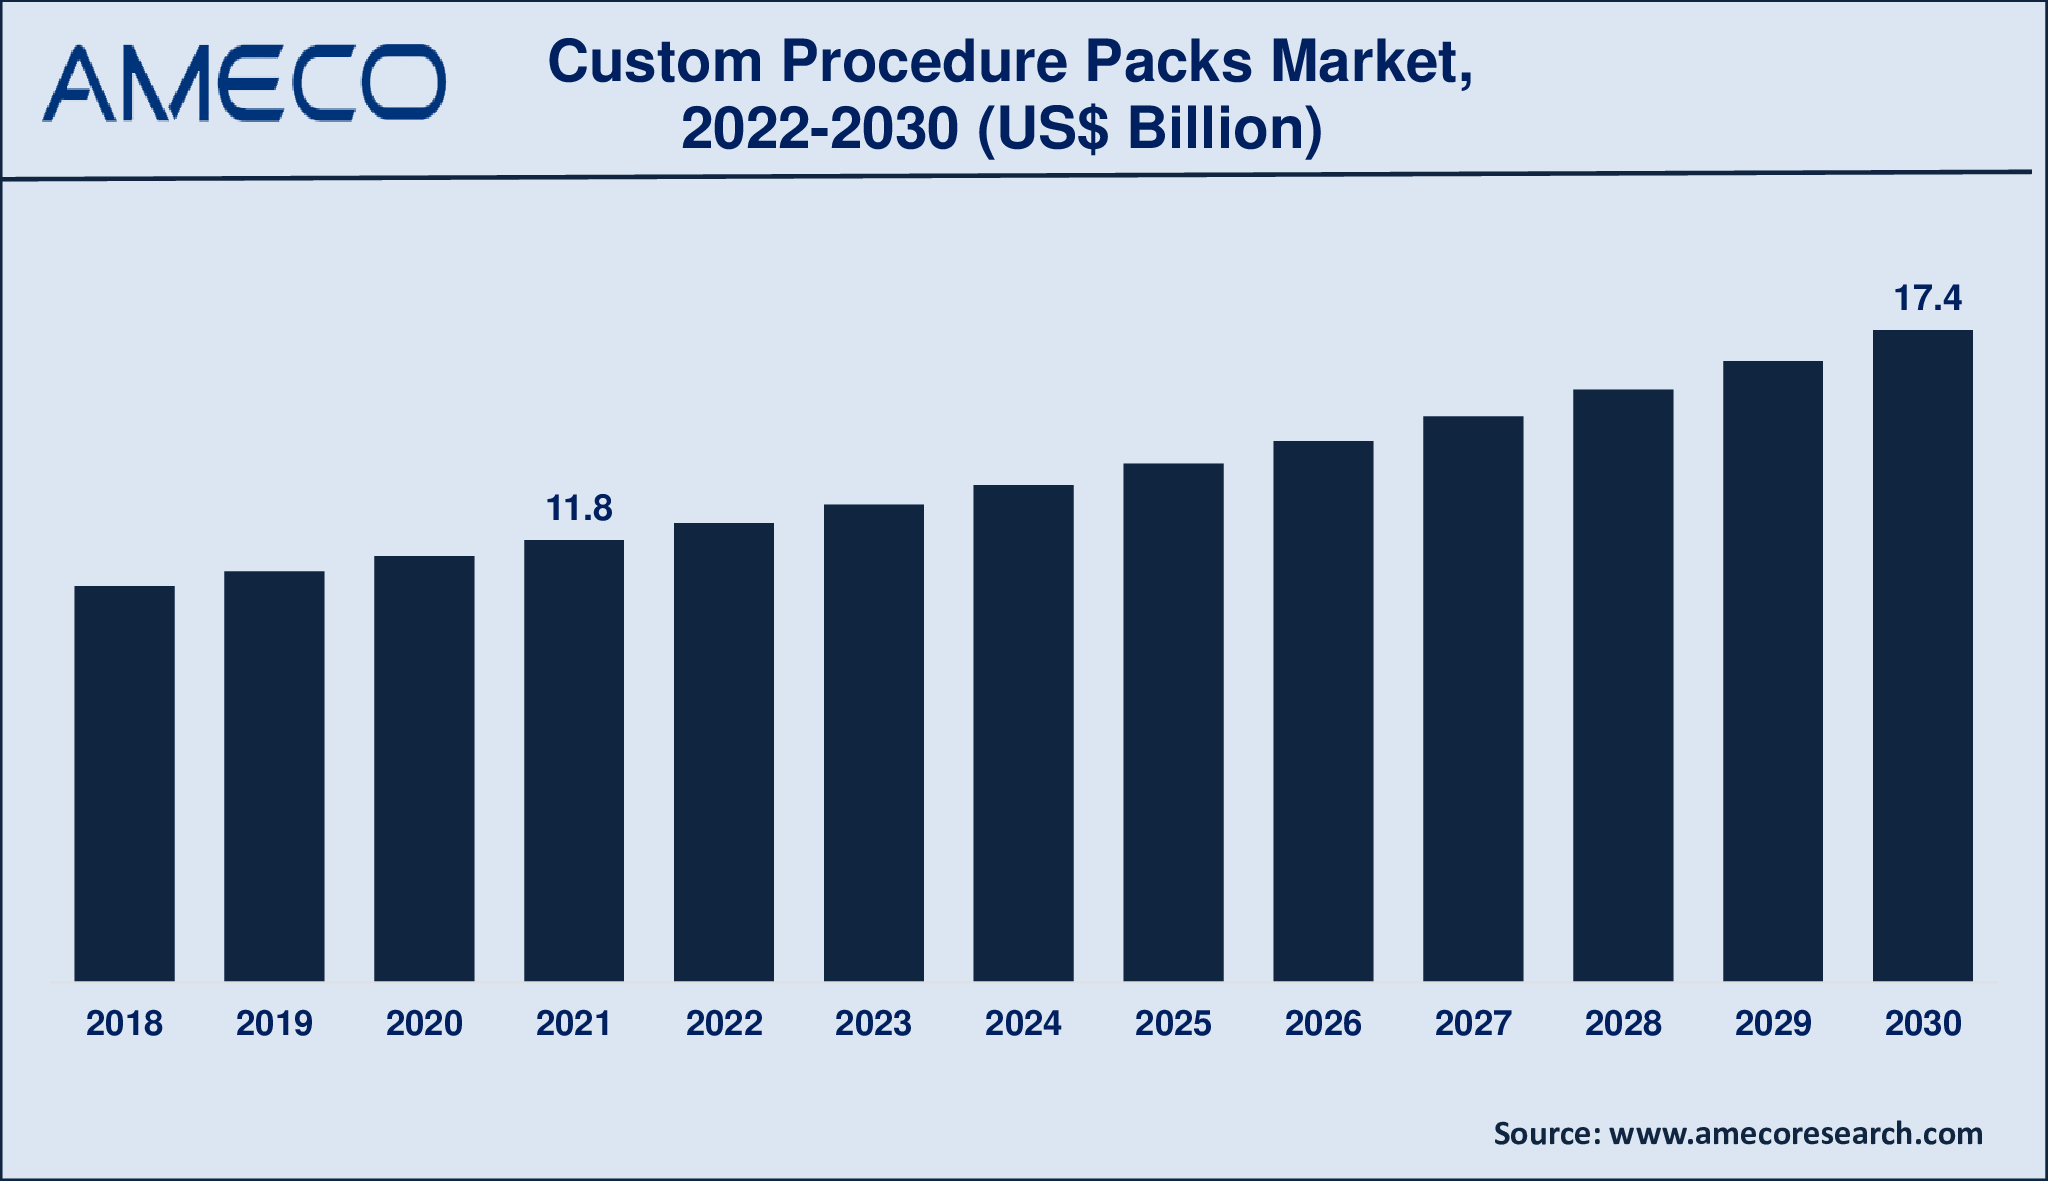 Custom Procedure Packs Market Size, Share, Growth, Trends, and Forecast 2022-2030